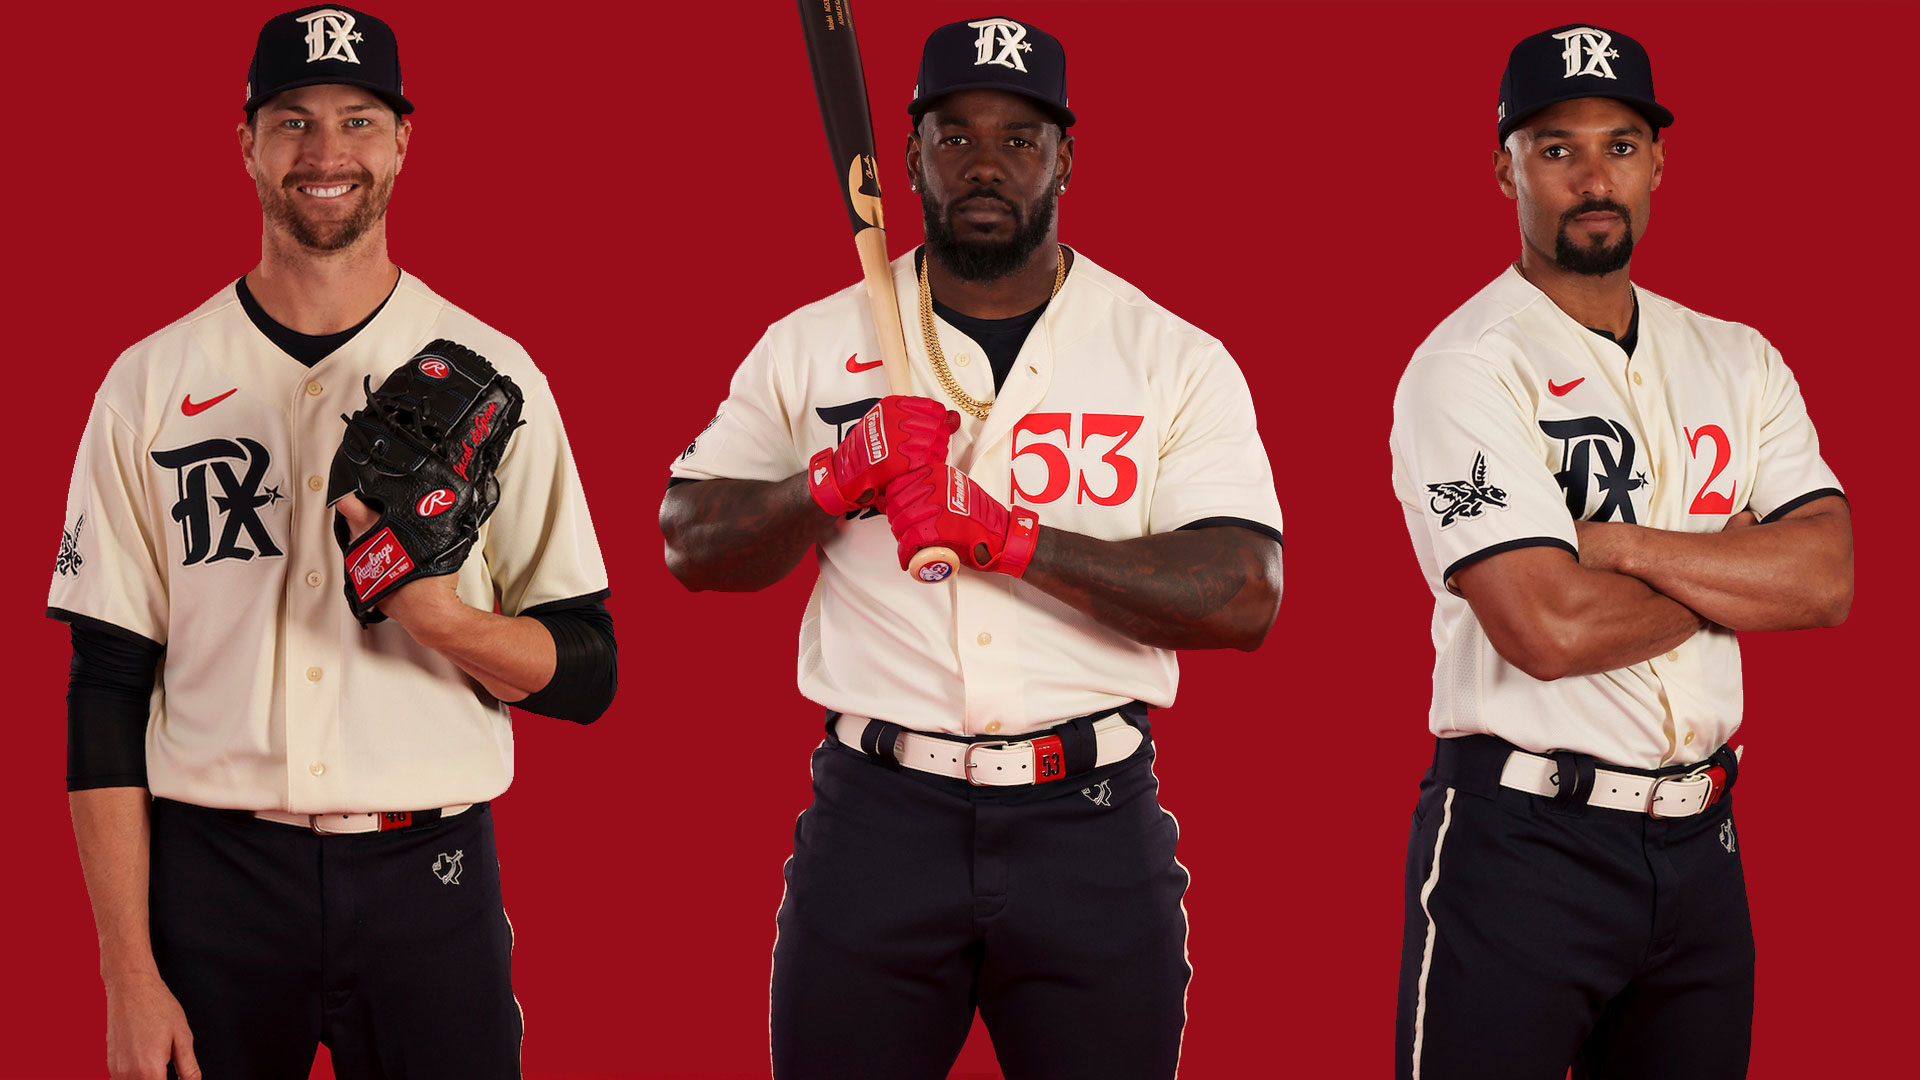 Baseball: MLB moving ahead with uniform ads for 2023